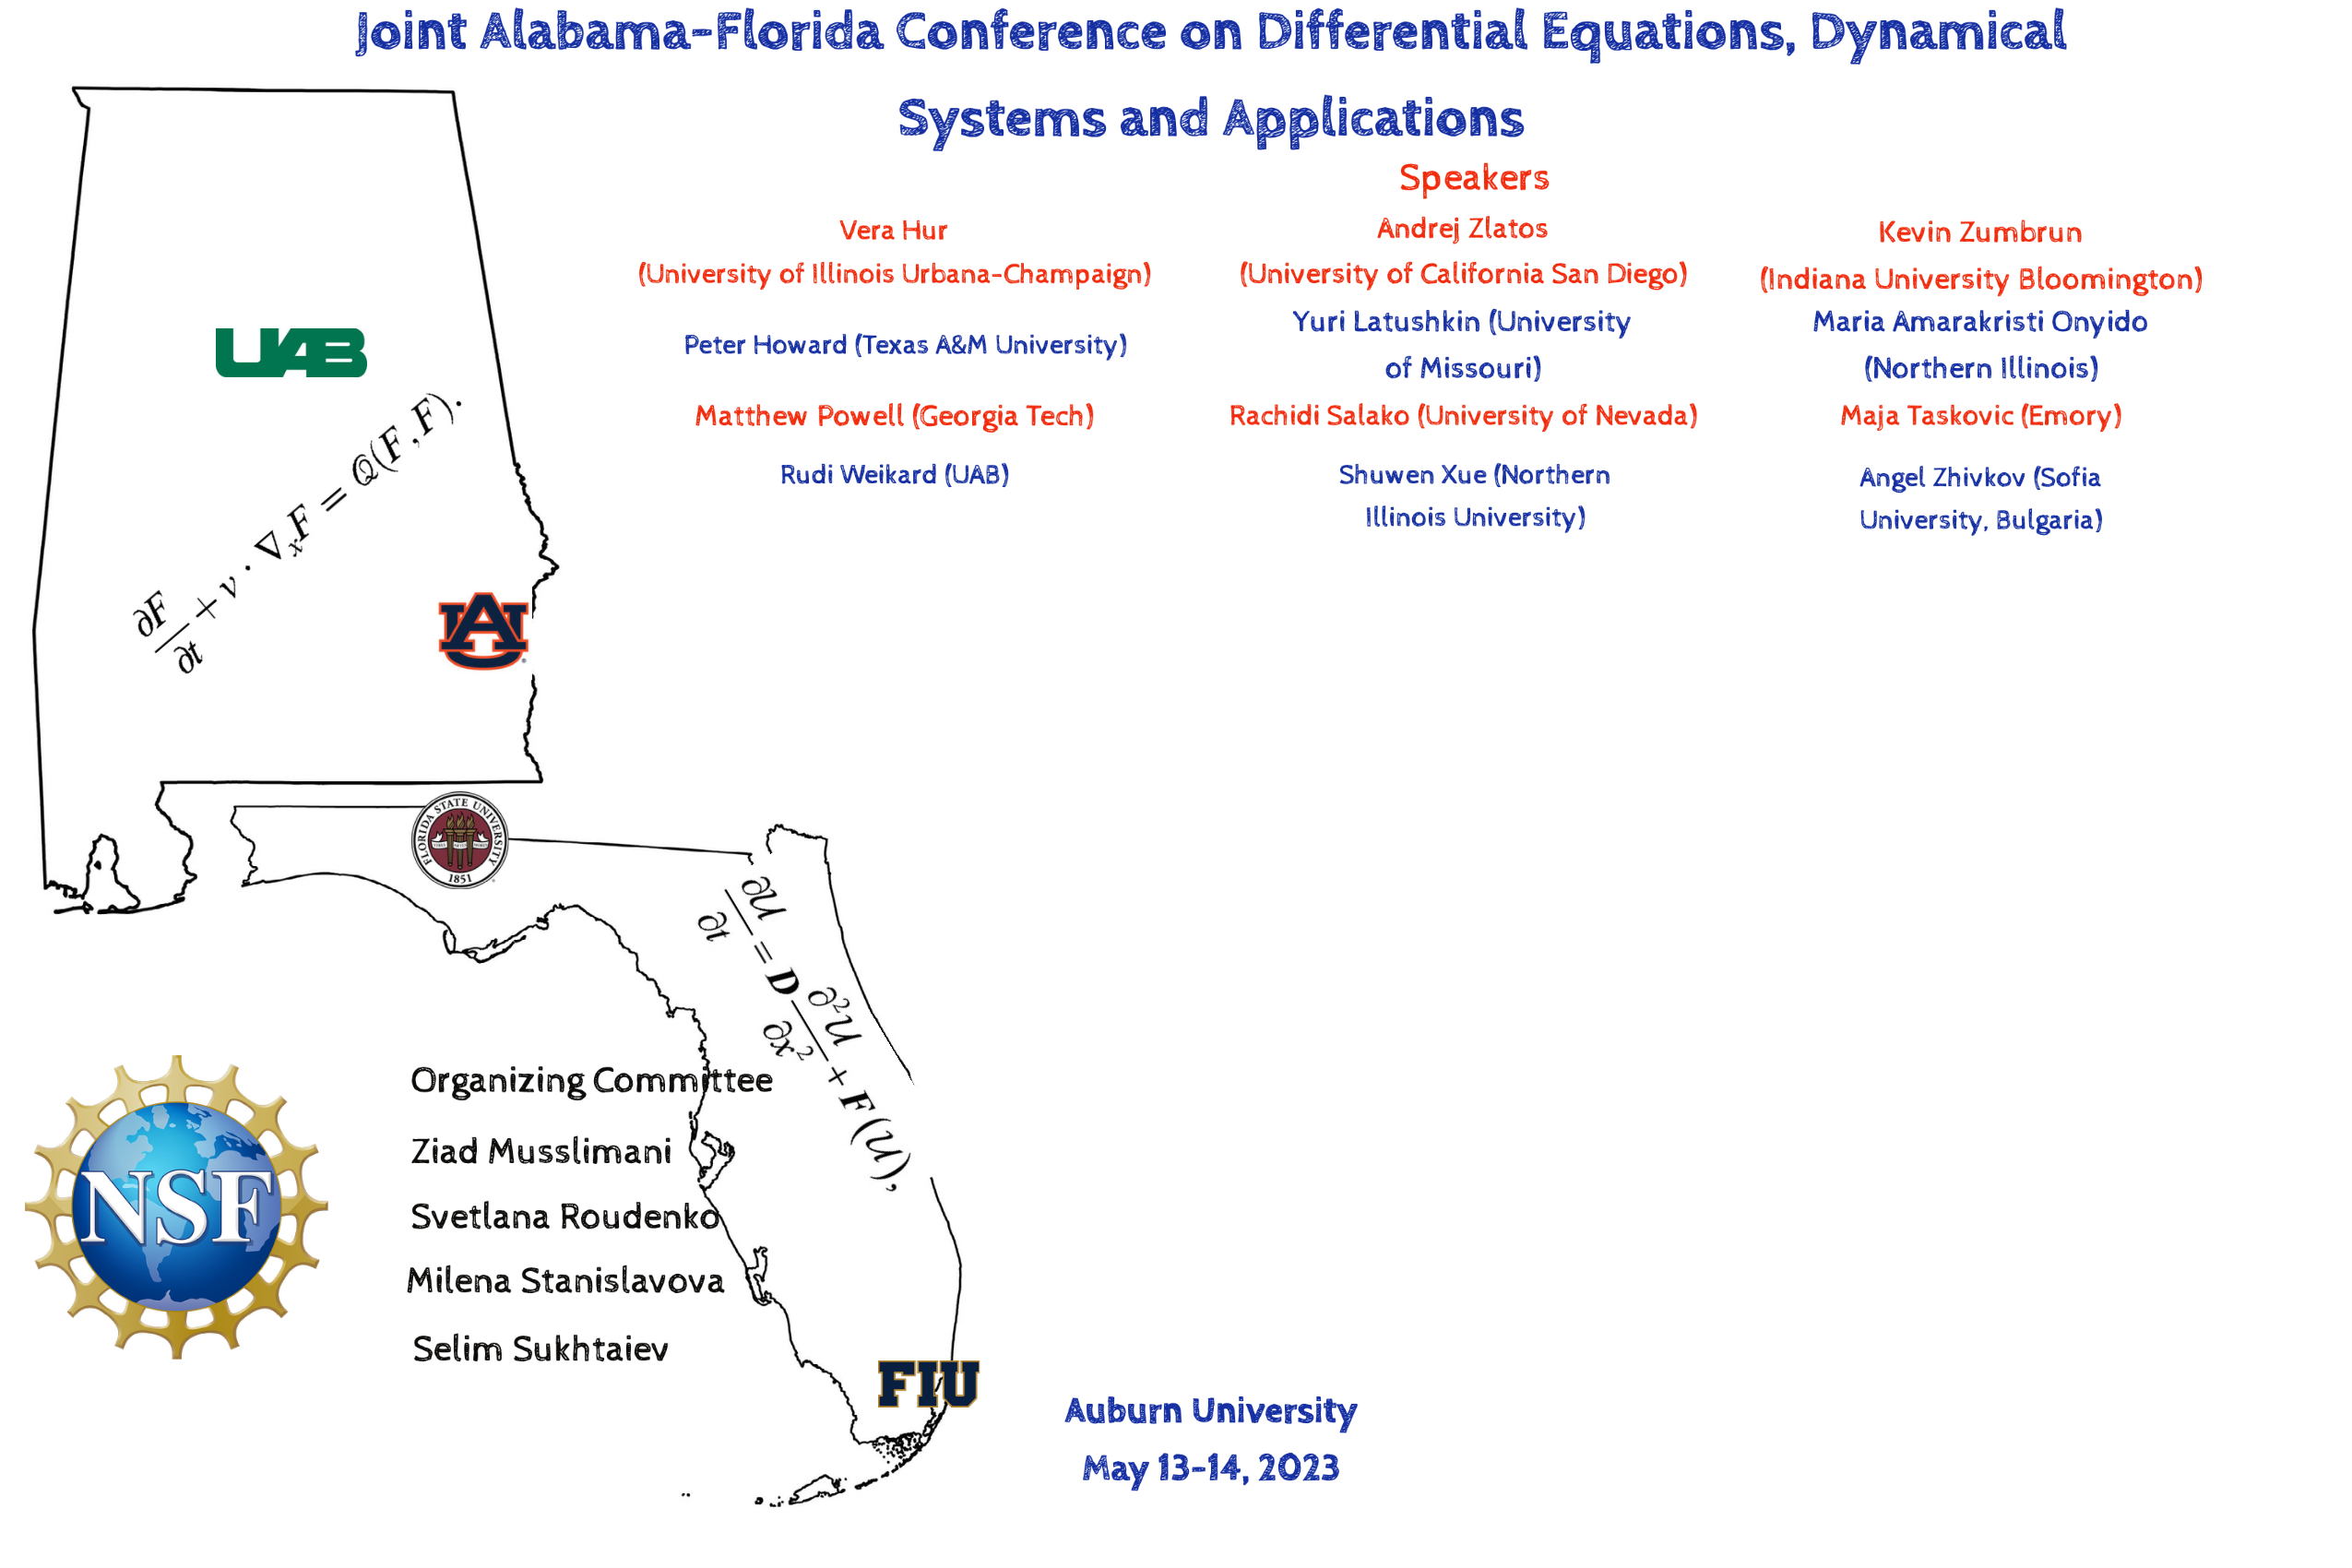 oint Alabama-Florida Conference on Differential Equations, Dynamical Systems and Applications 